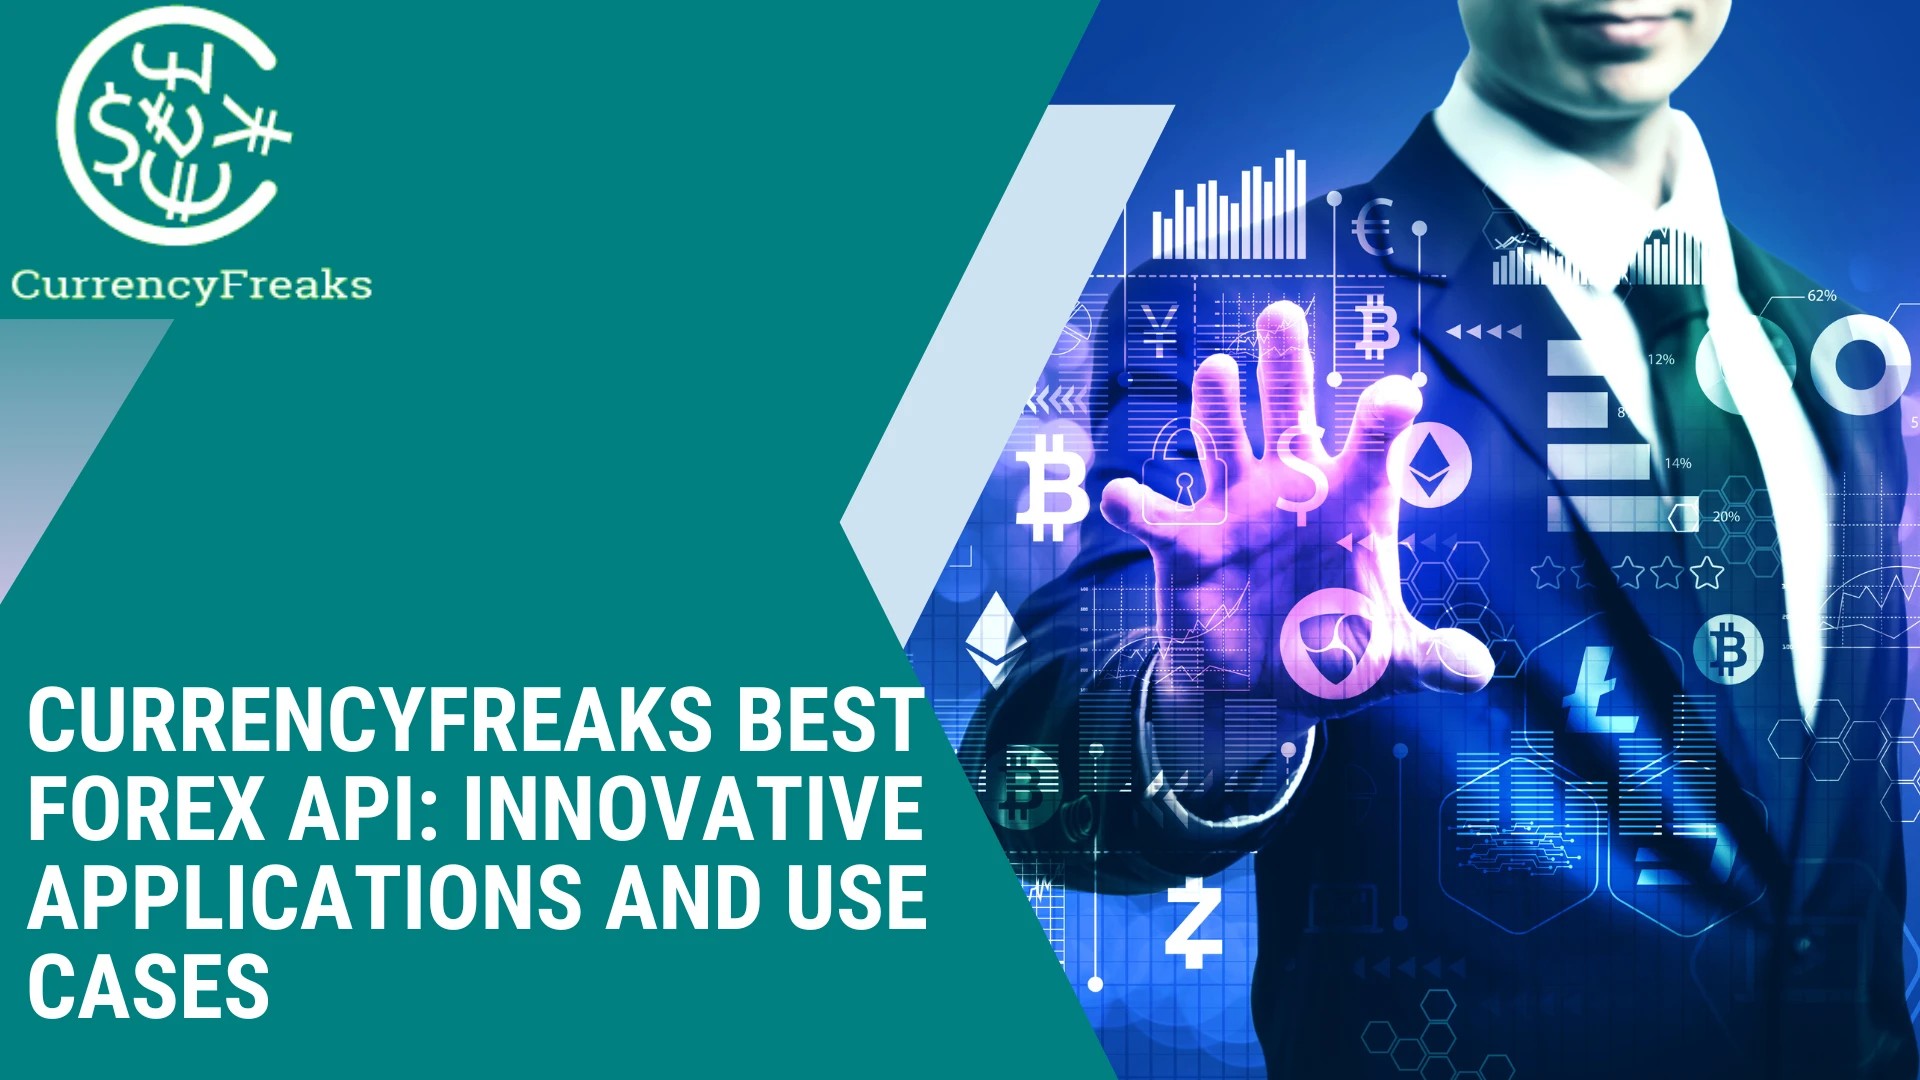 CurrencyFreaks Best Forex API: Innovative Applications and Use Cases